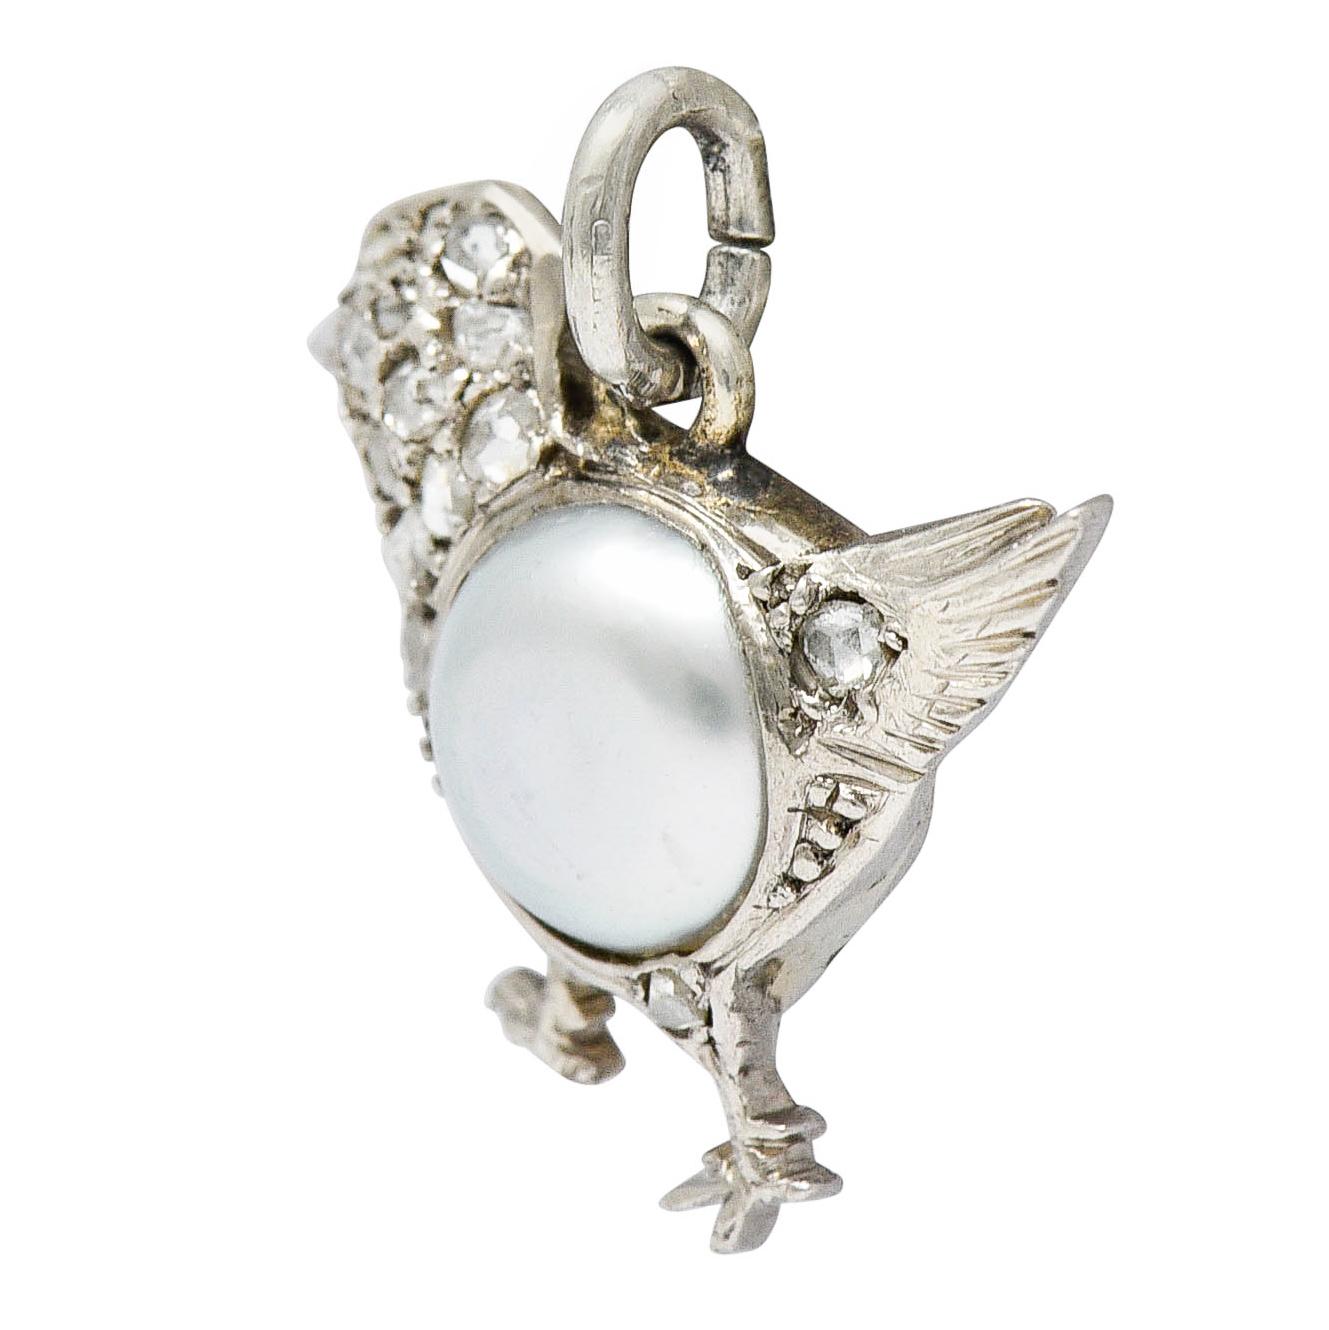 Charm is designed as chick centering a 6.0 mm mabe pearl

Gray in body color with strong iridescence and excellent luster

Accented by rose cut diamonds weighing approximately 0.17 carat

Tested as platinum

Circa: 1920s

Measures: 5/8 x 5/8